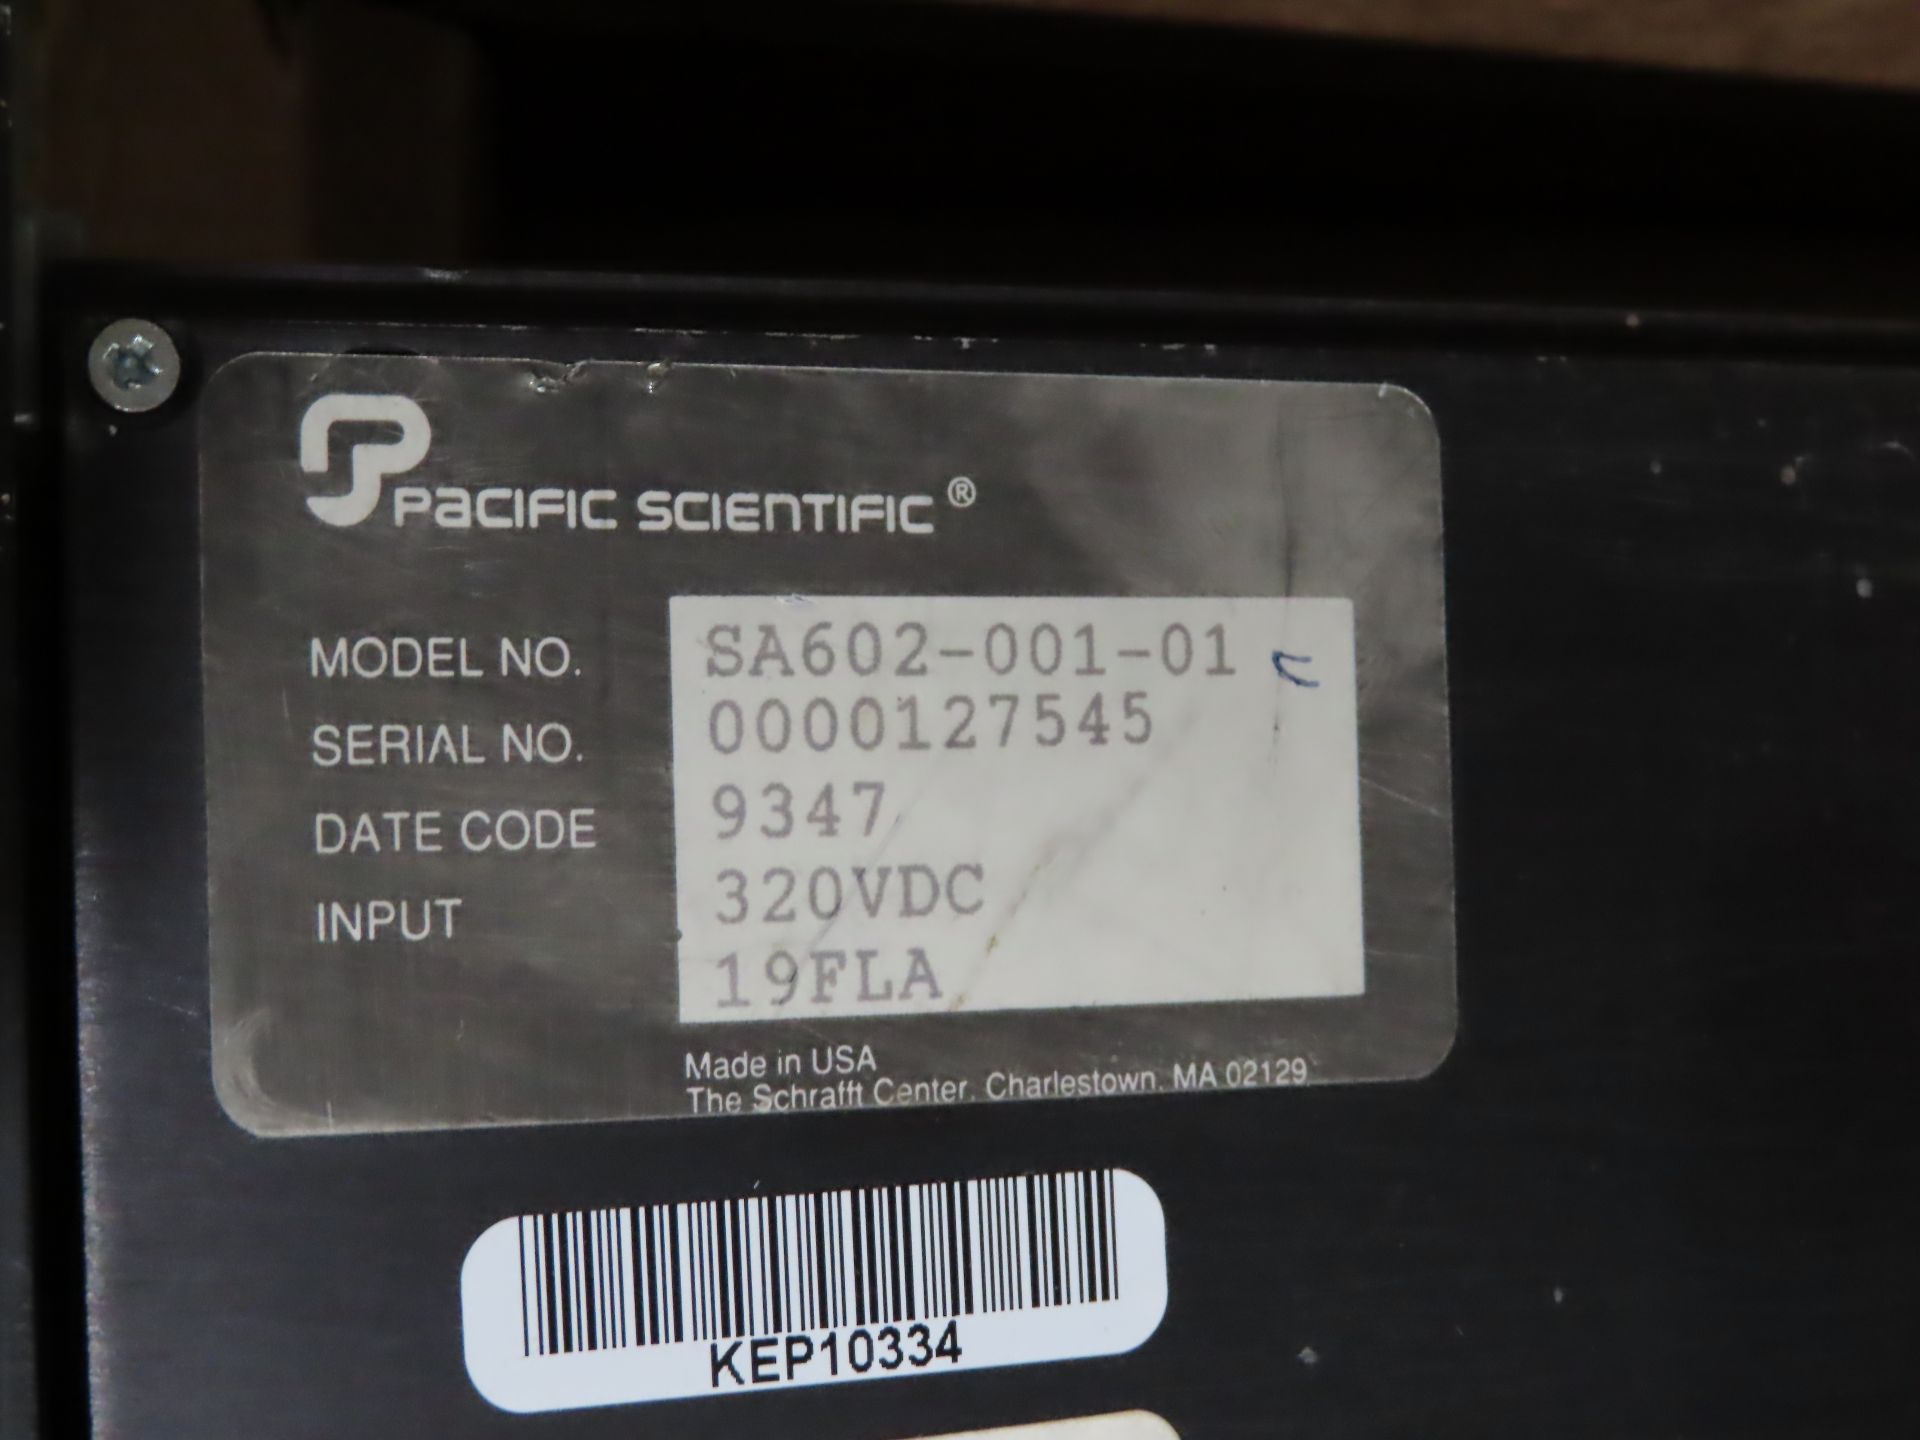 Pacific Scientific model SA602-001-01 servo amplifier, as always, with Brolyn LLC auctions, all lots - Image 2 of 2